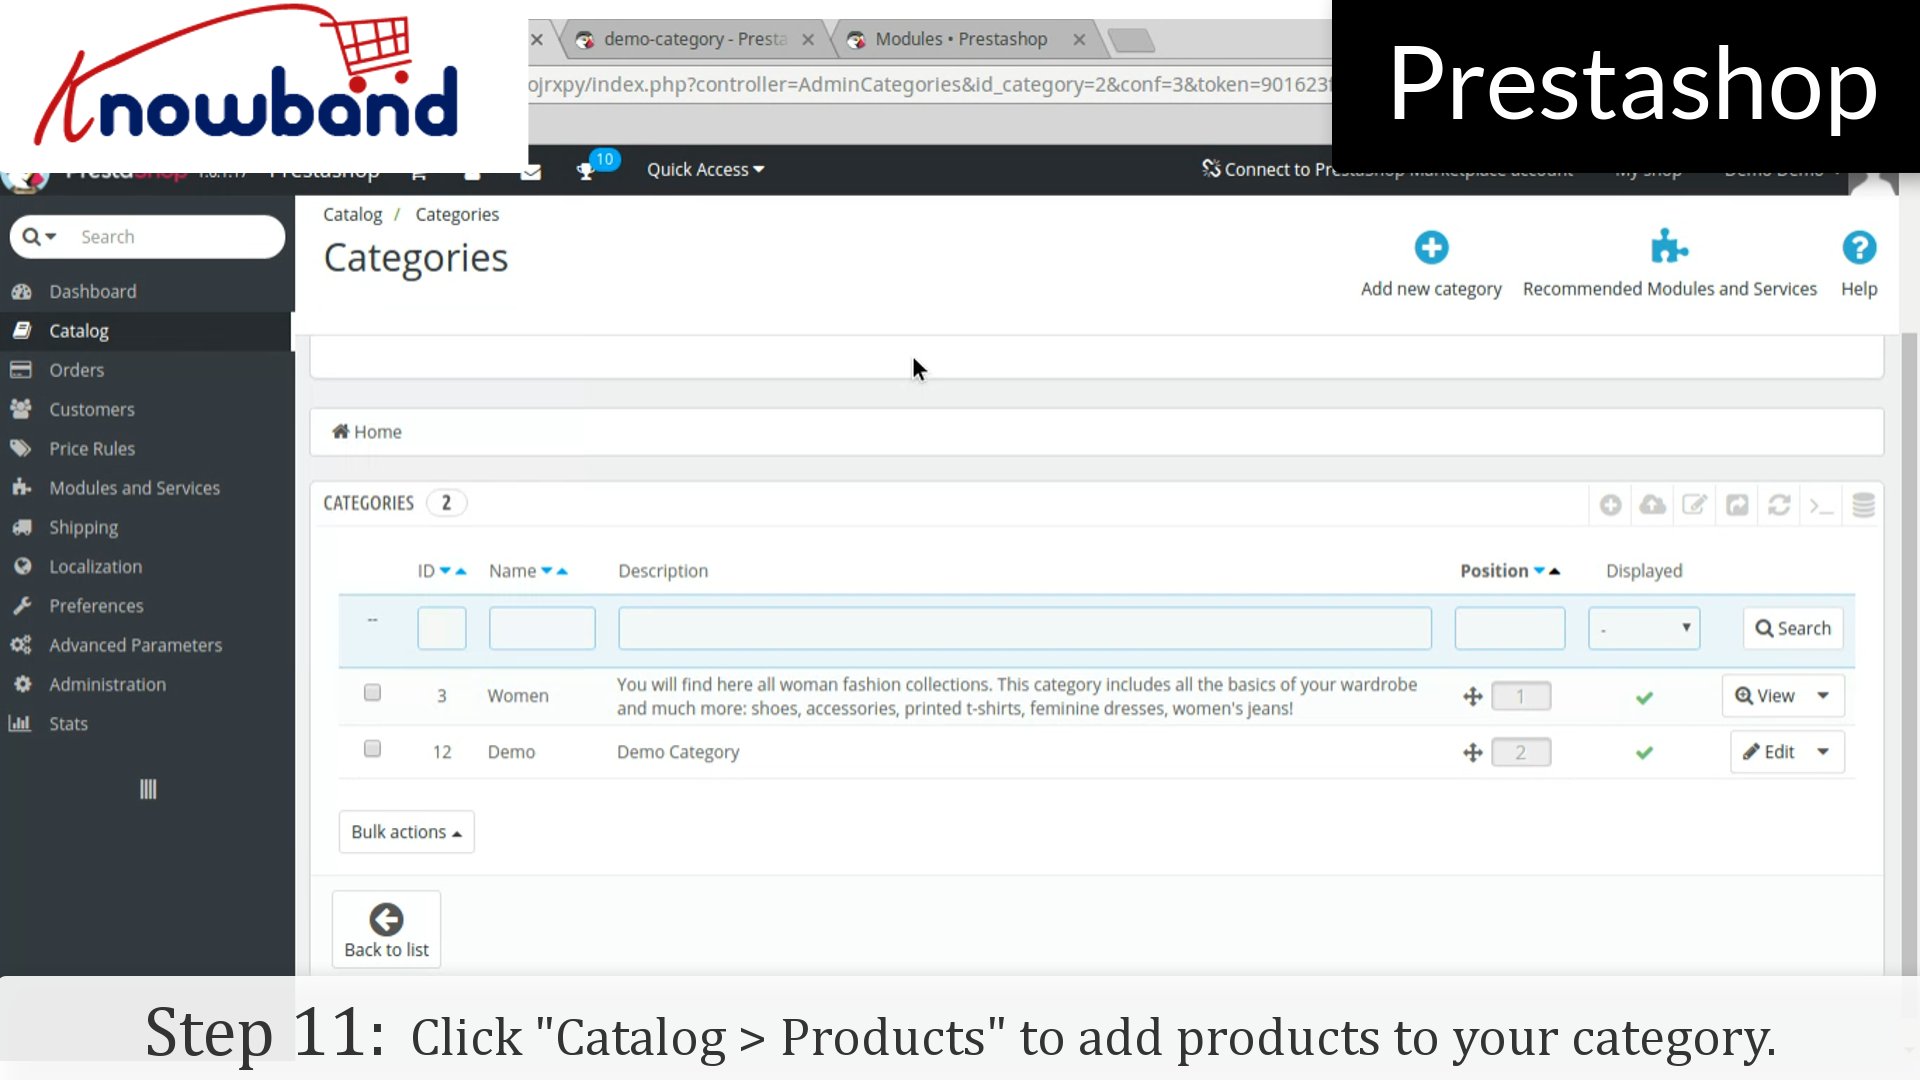 Catalog Products